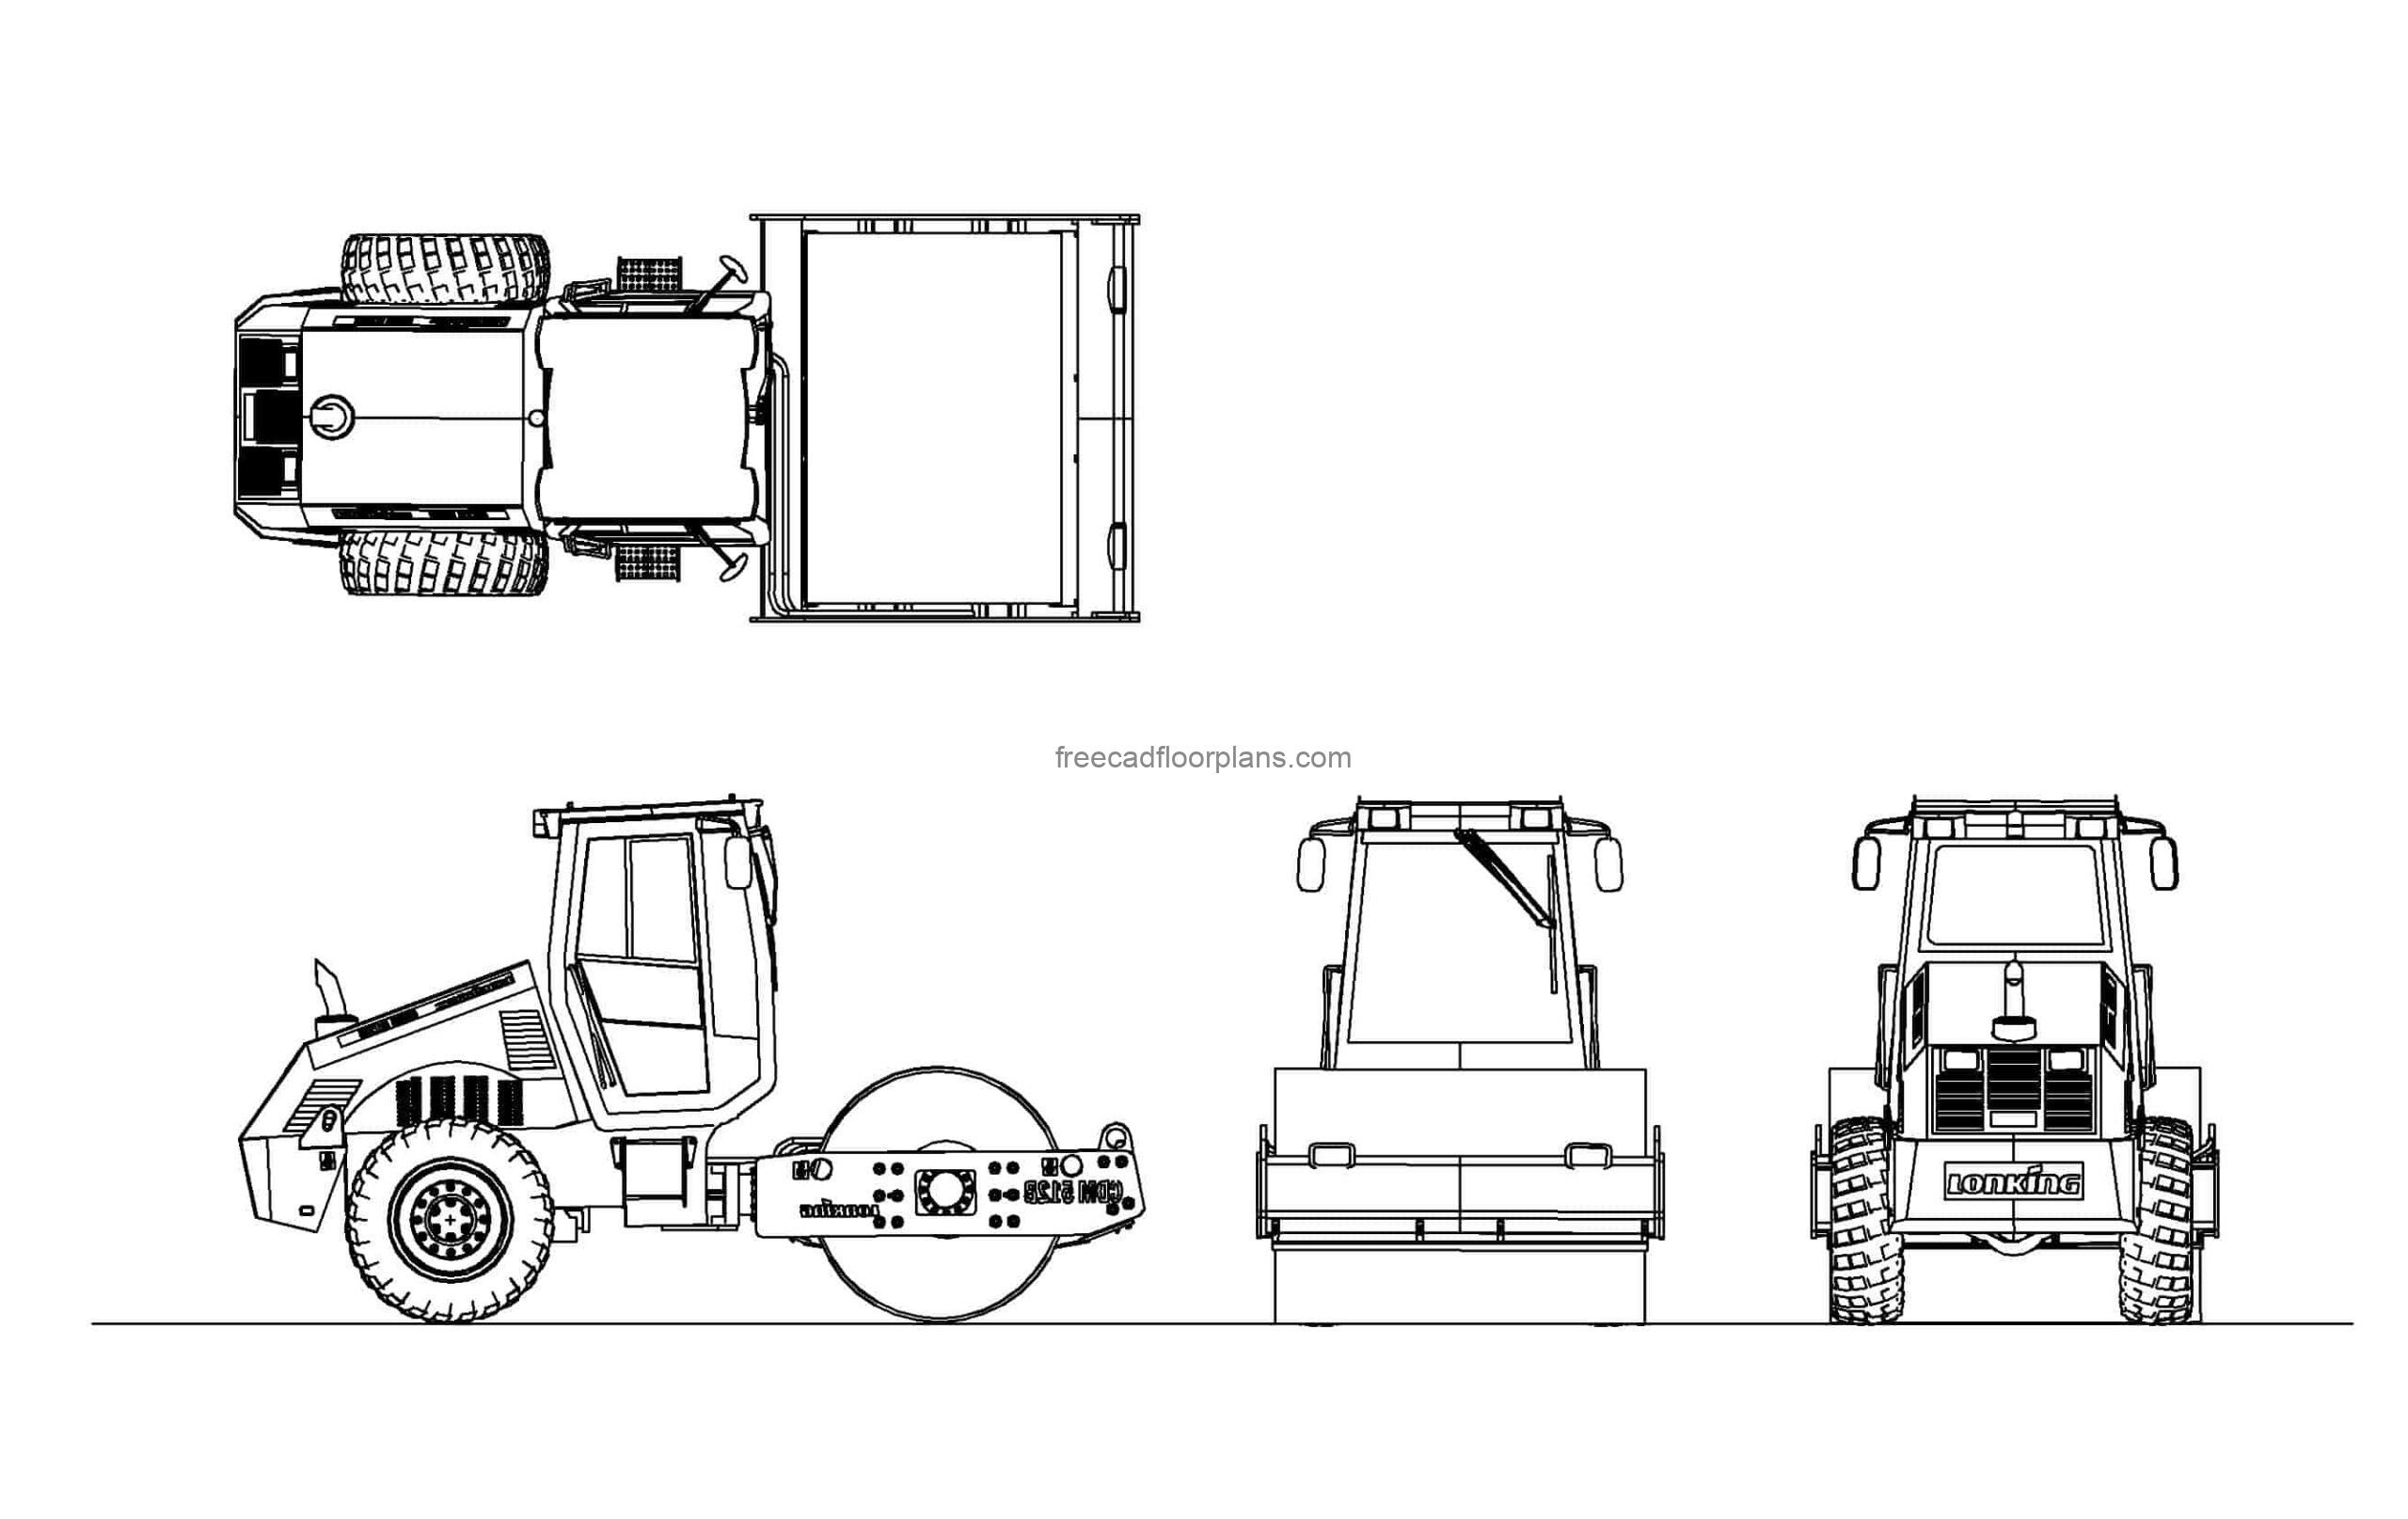 road roller autocad 2d drawings, plan and elevations 2d views, dwg file for free download